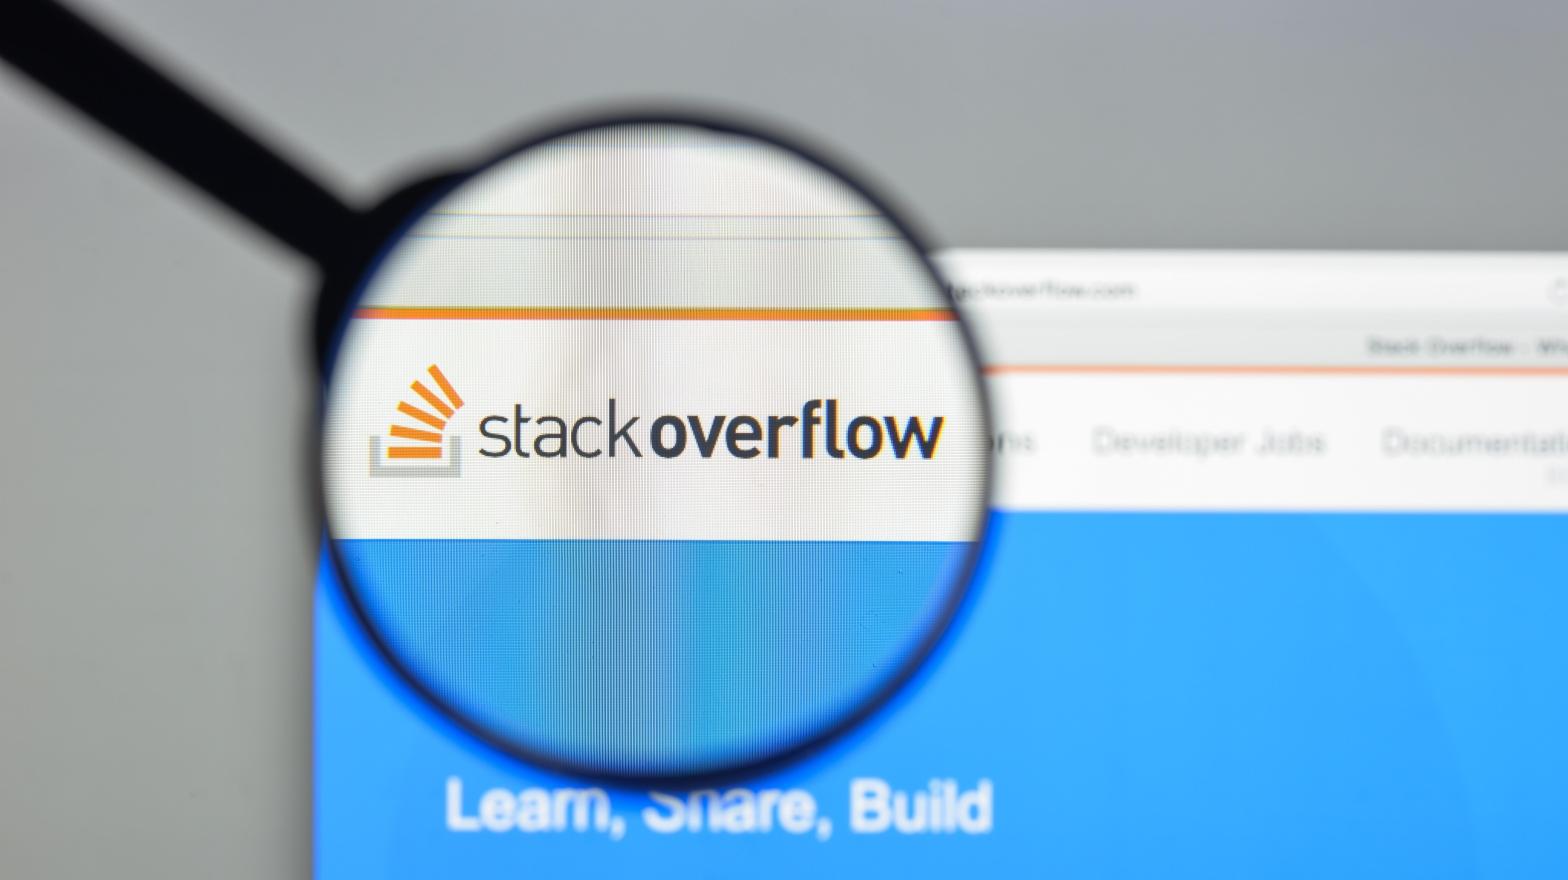 ChatGPT could be cratering Stack Overflow's traffic the same way Chegg claims it did to them.  (Image: Casimiro PT, Shutterstock)